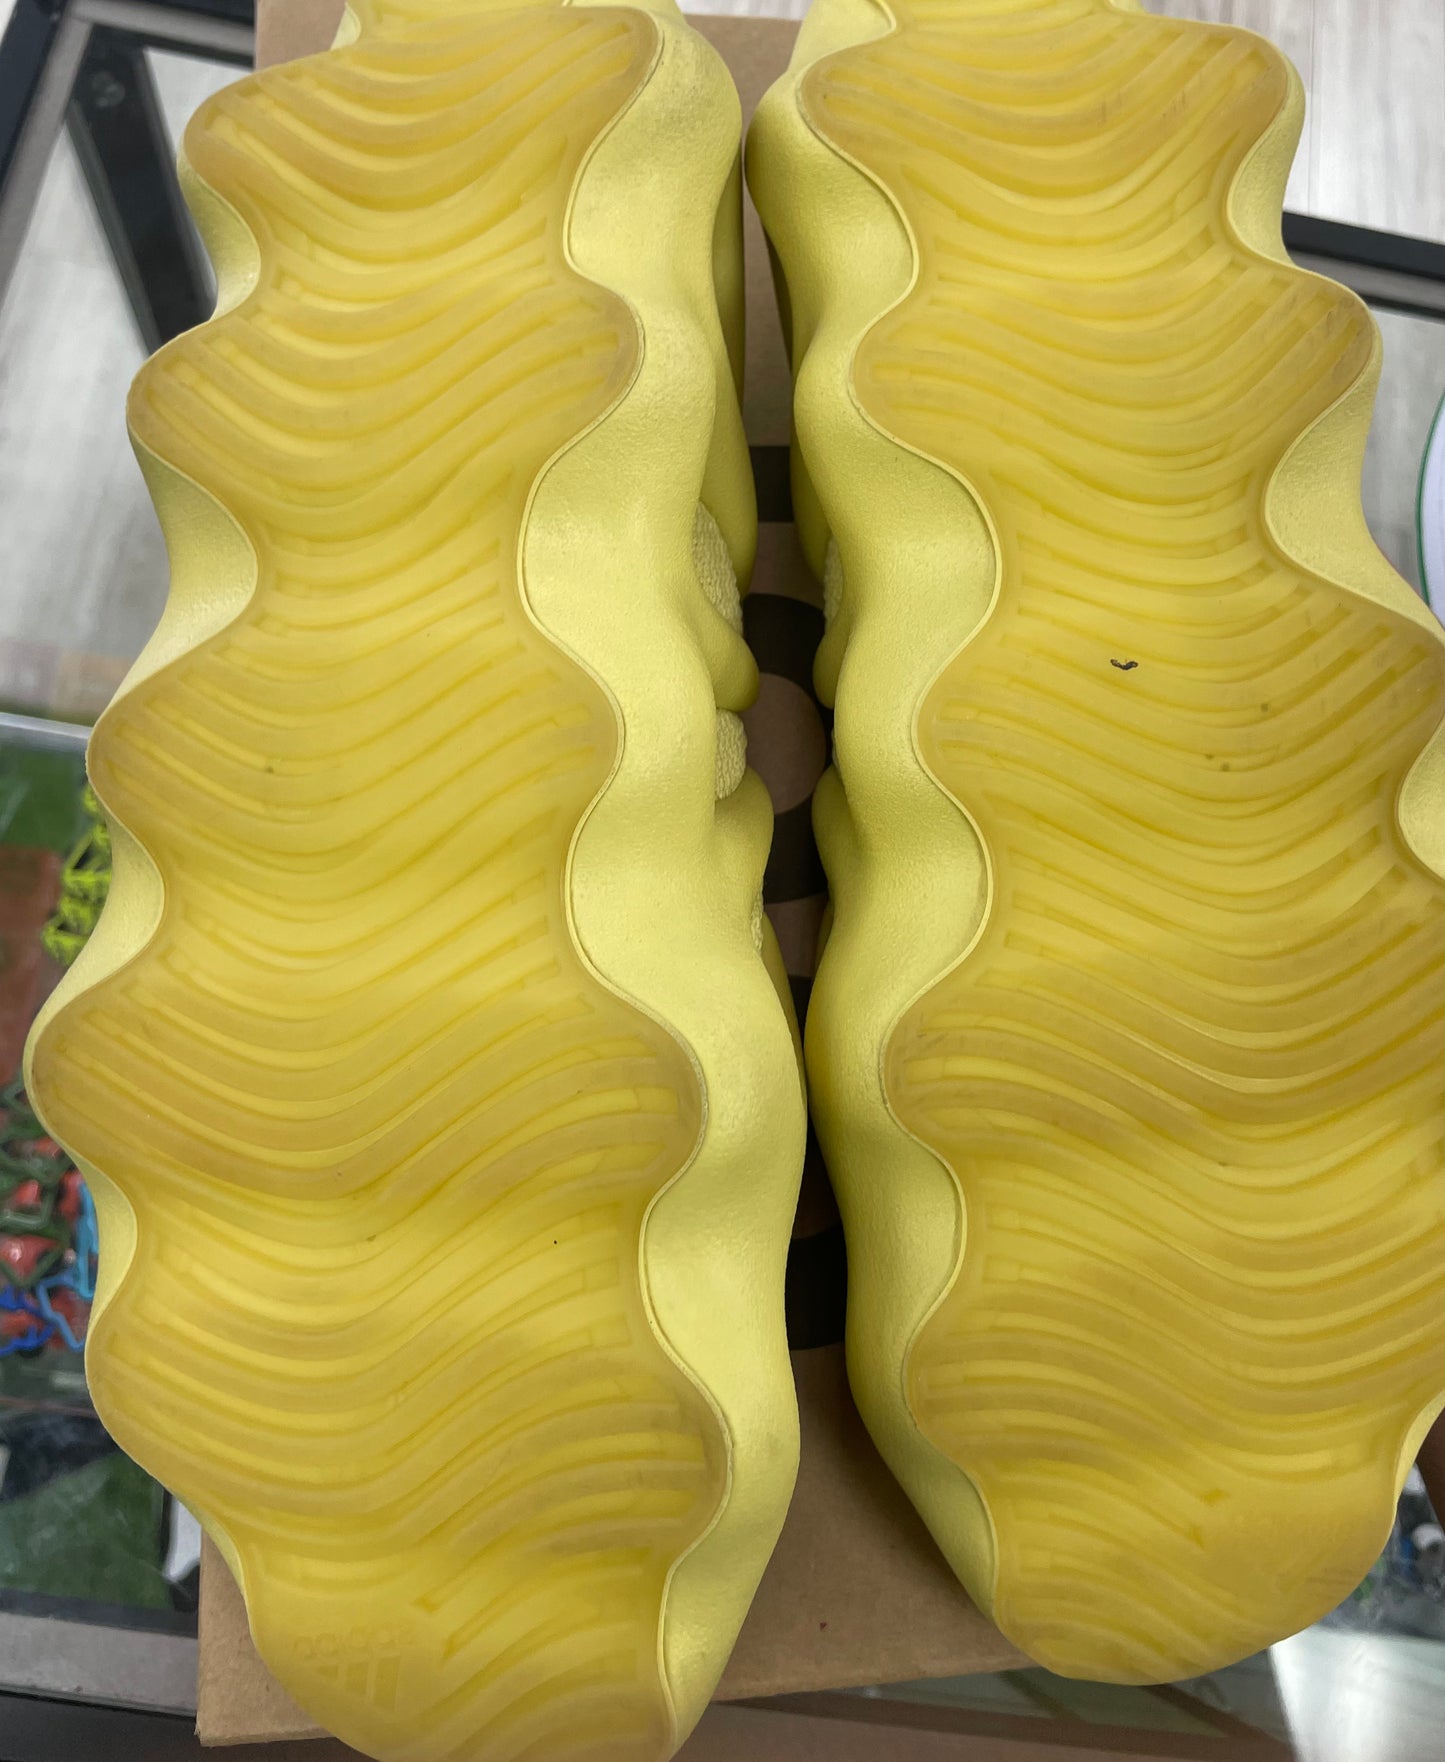 Yeezy 450 "Sulfur" *Size 10.5 Preowned*